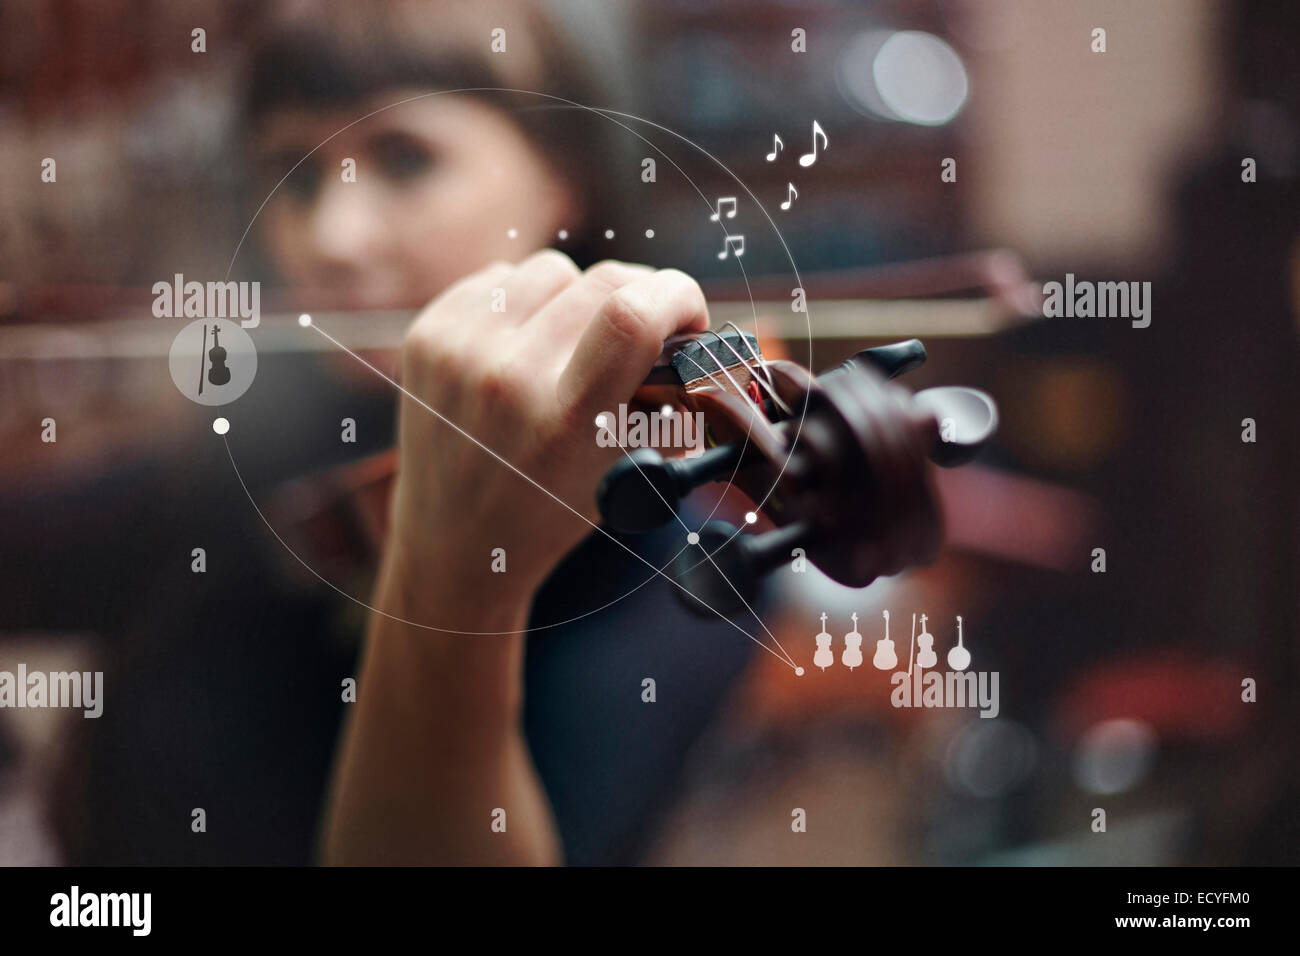 Caucasian woman playing violin overlaid with graphic design Stock Photo